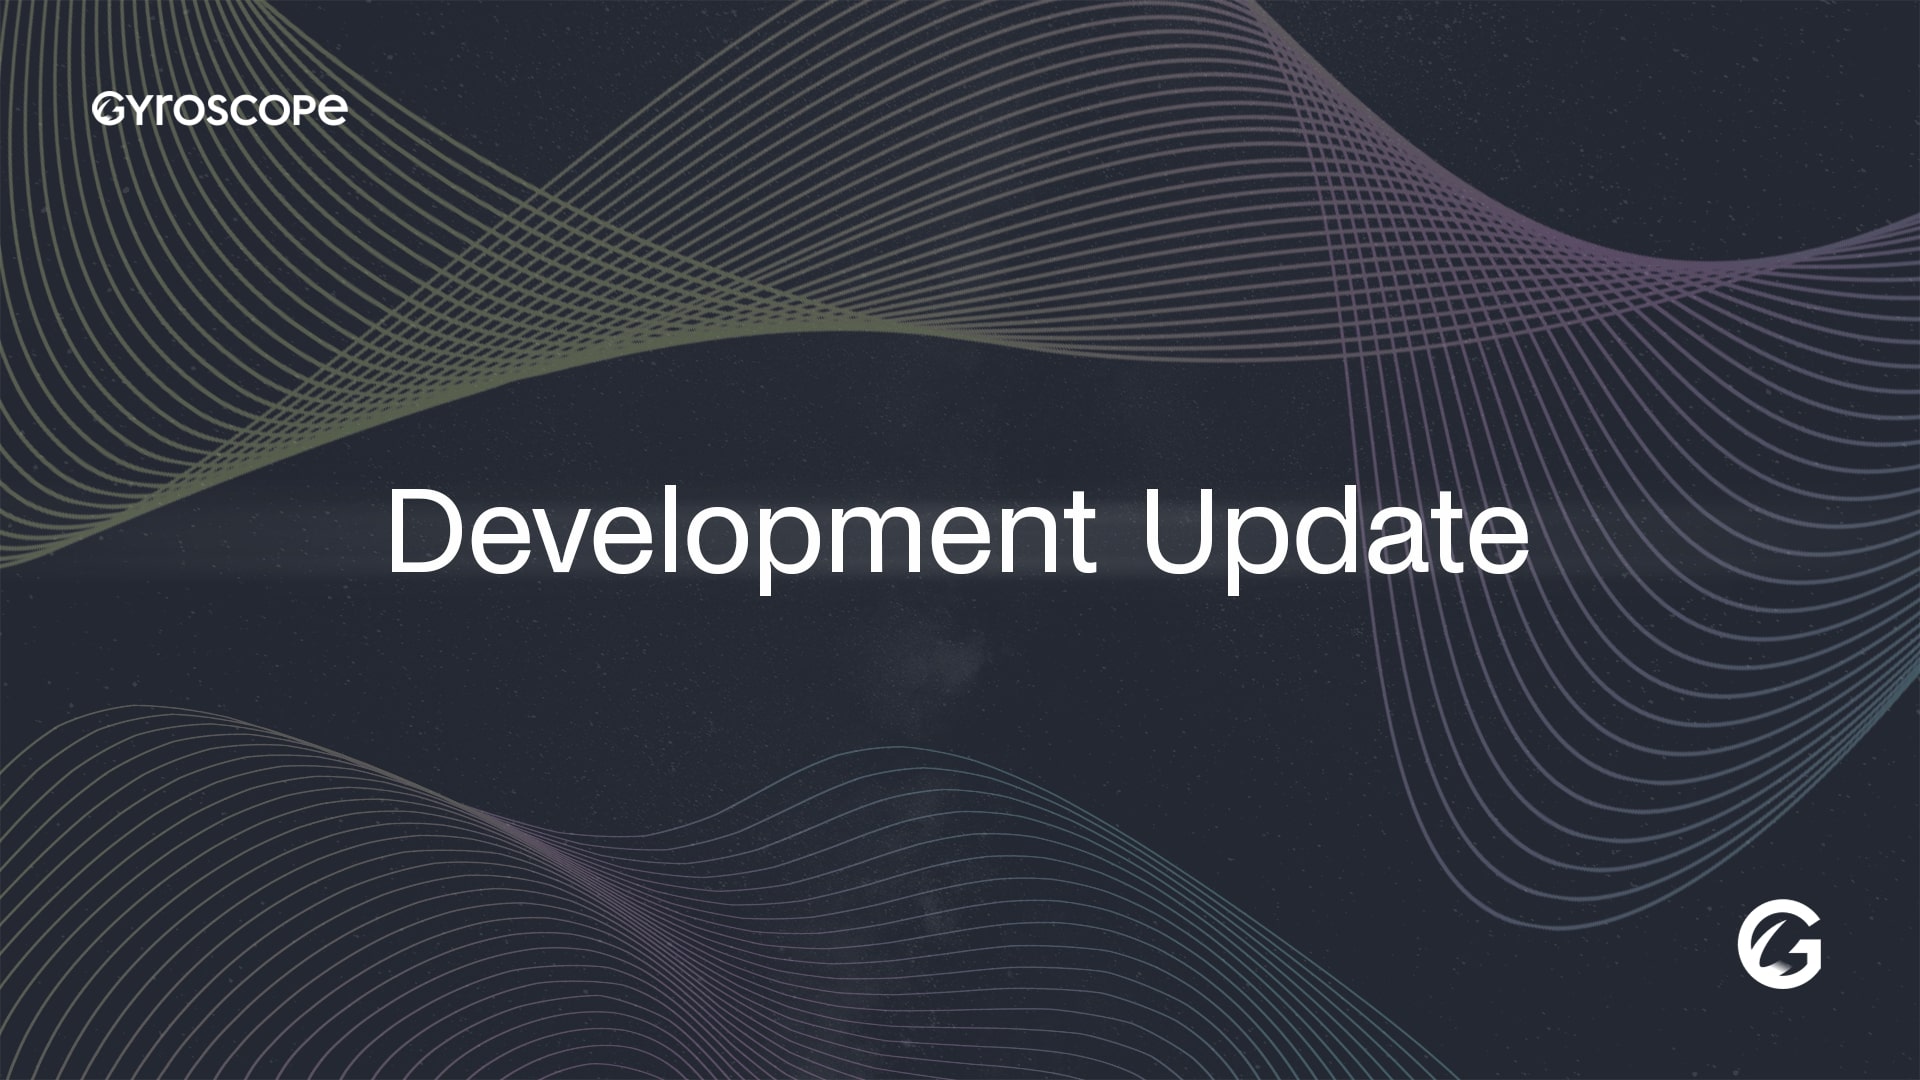 Cover Image for Community Update: Full Protocol Deployment Under Way